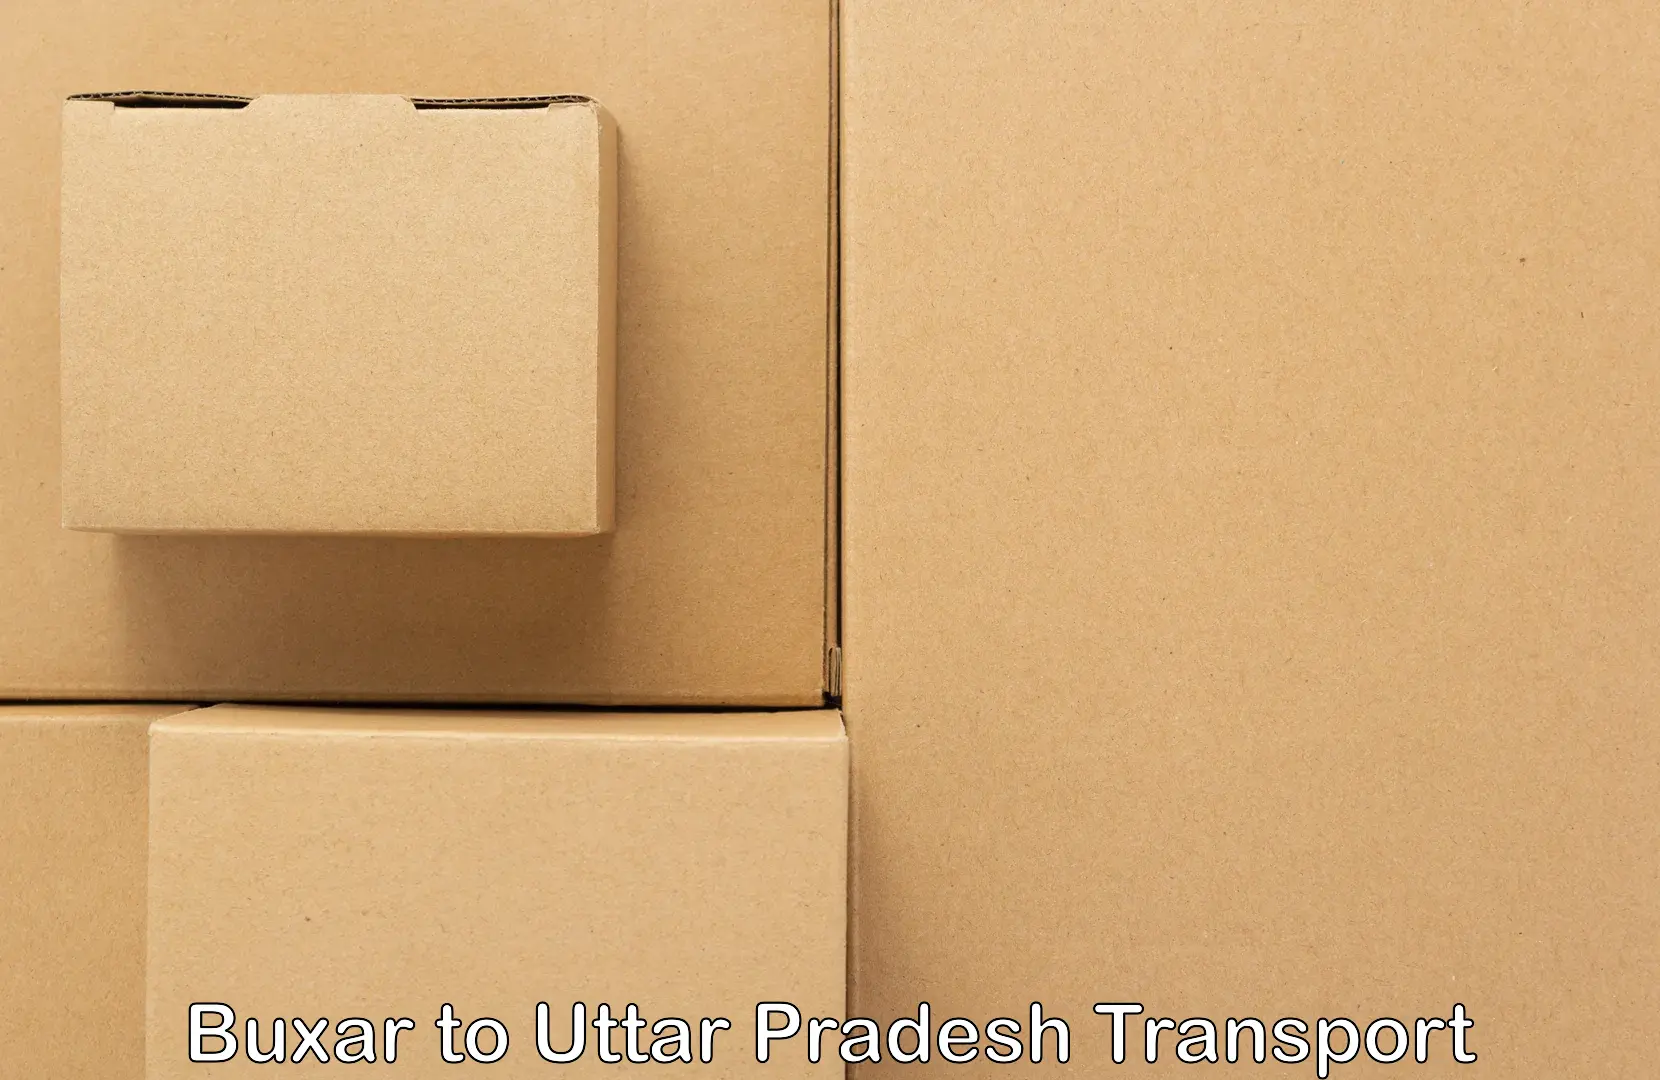 Truck transport companies in India Buxar to Moradabad